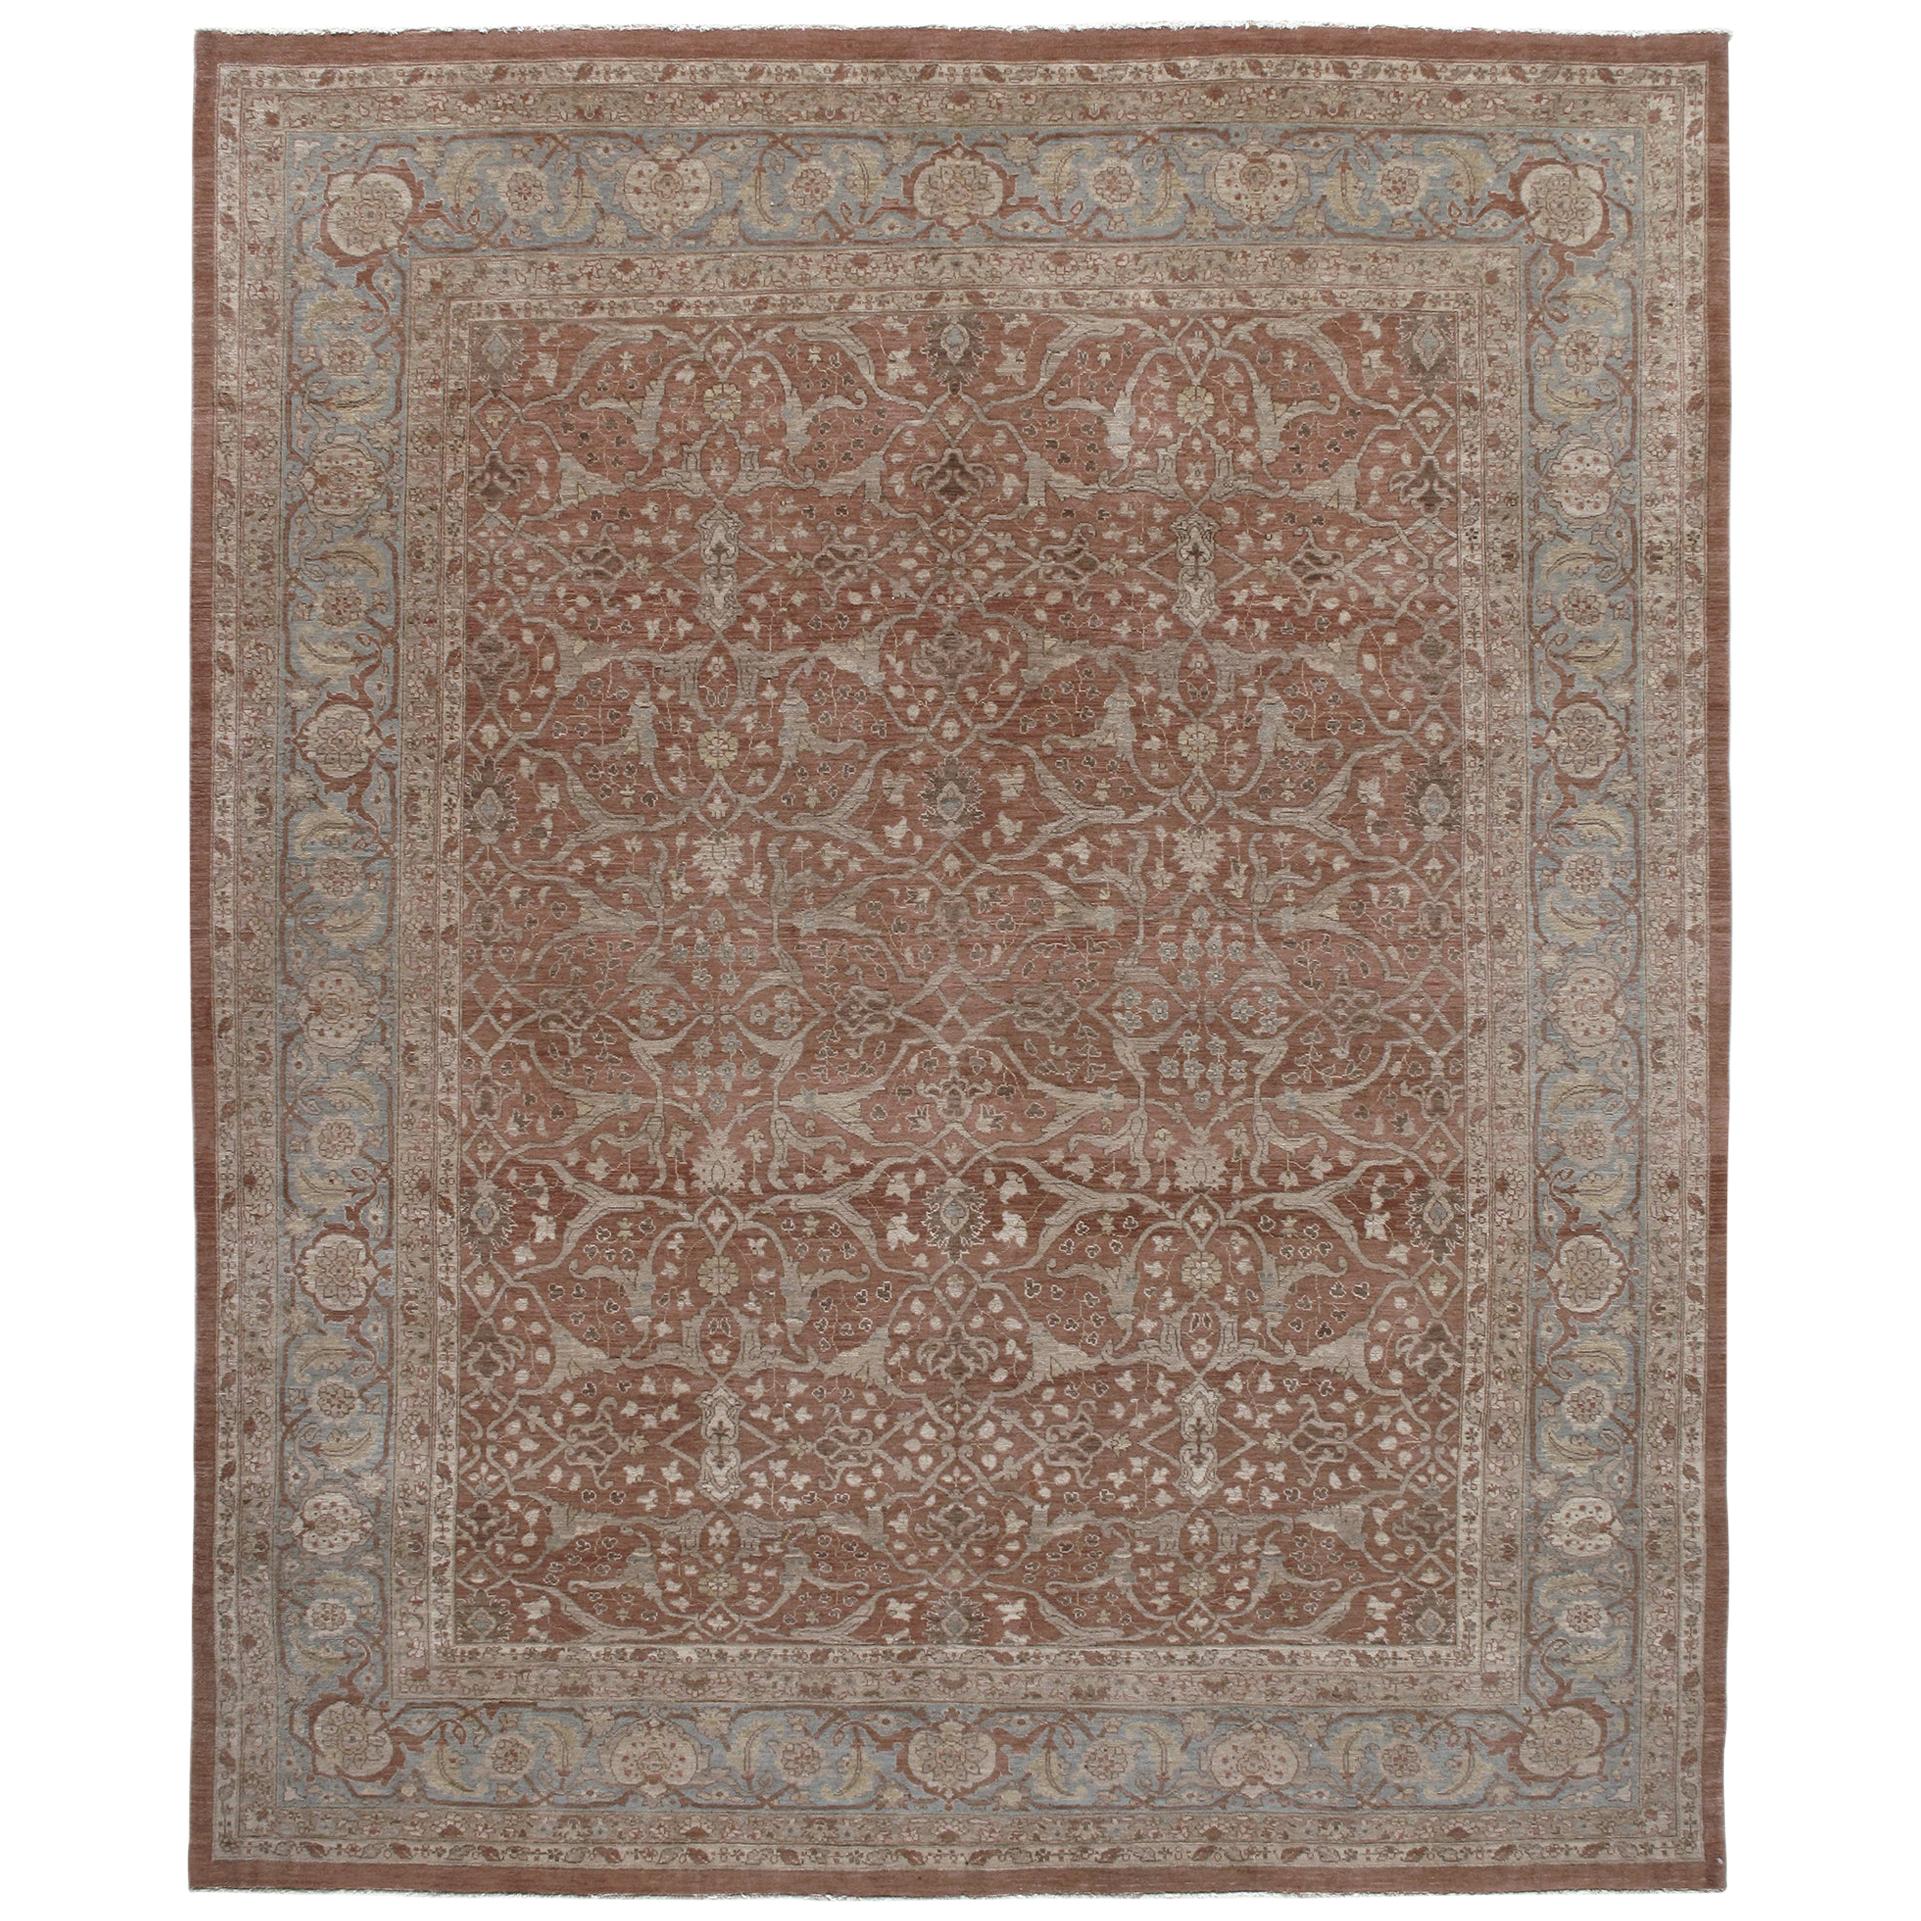 Persian Traditional Tabriz Handknotted Rug in Camel and Rust Color